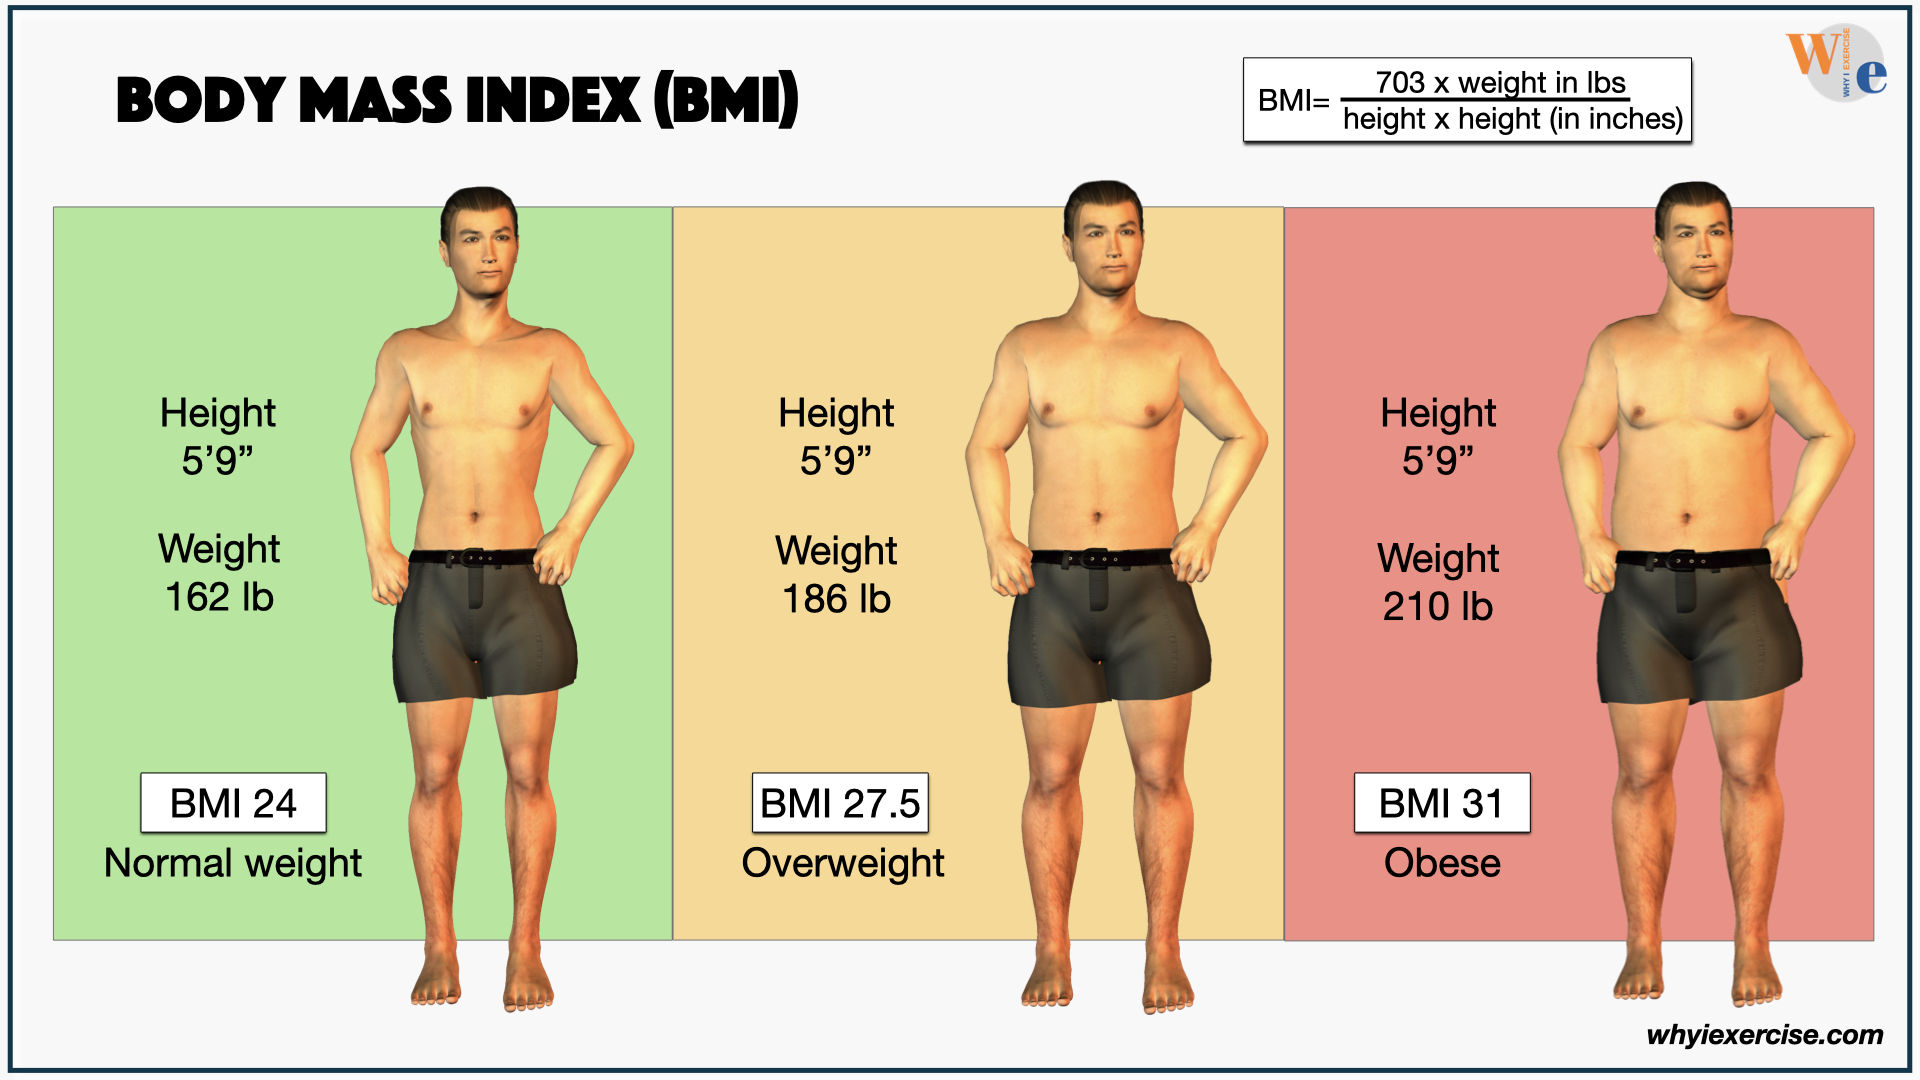 https://www.whyiexercise.com/images/body-mass-index-overweight-obese-men.jpg